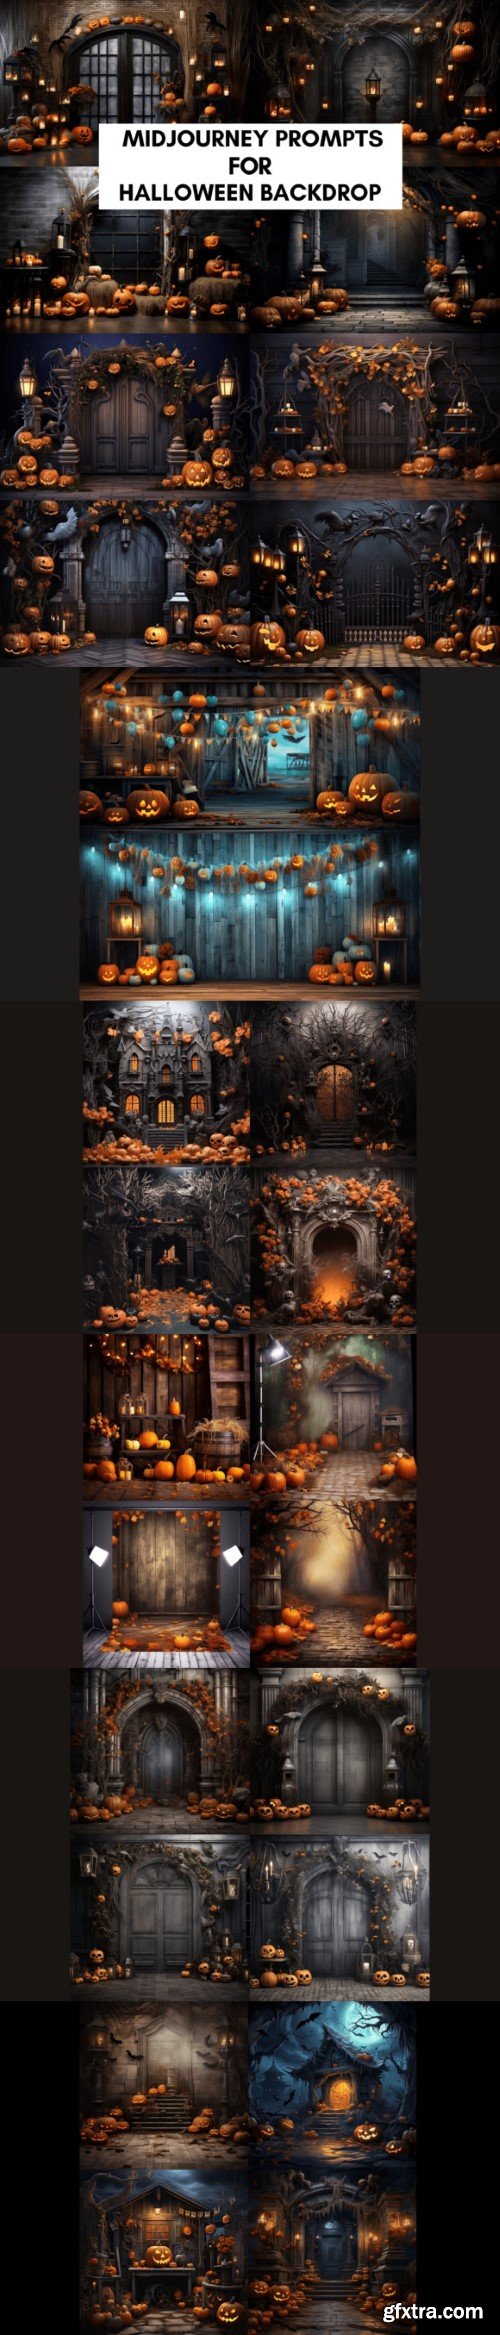 Prompts for Halloween Backdrop